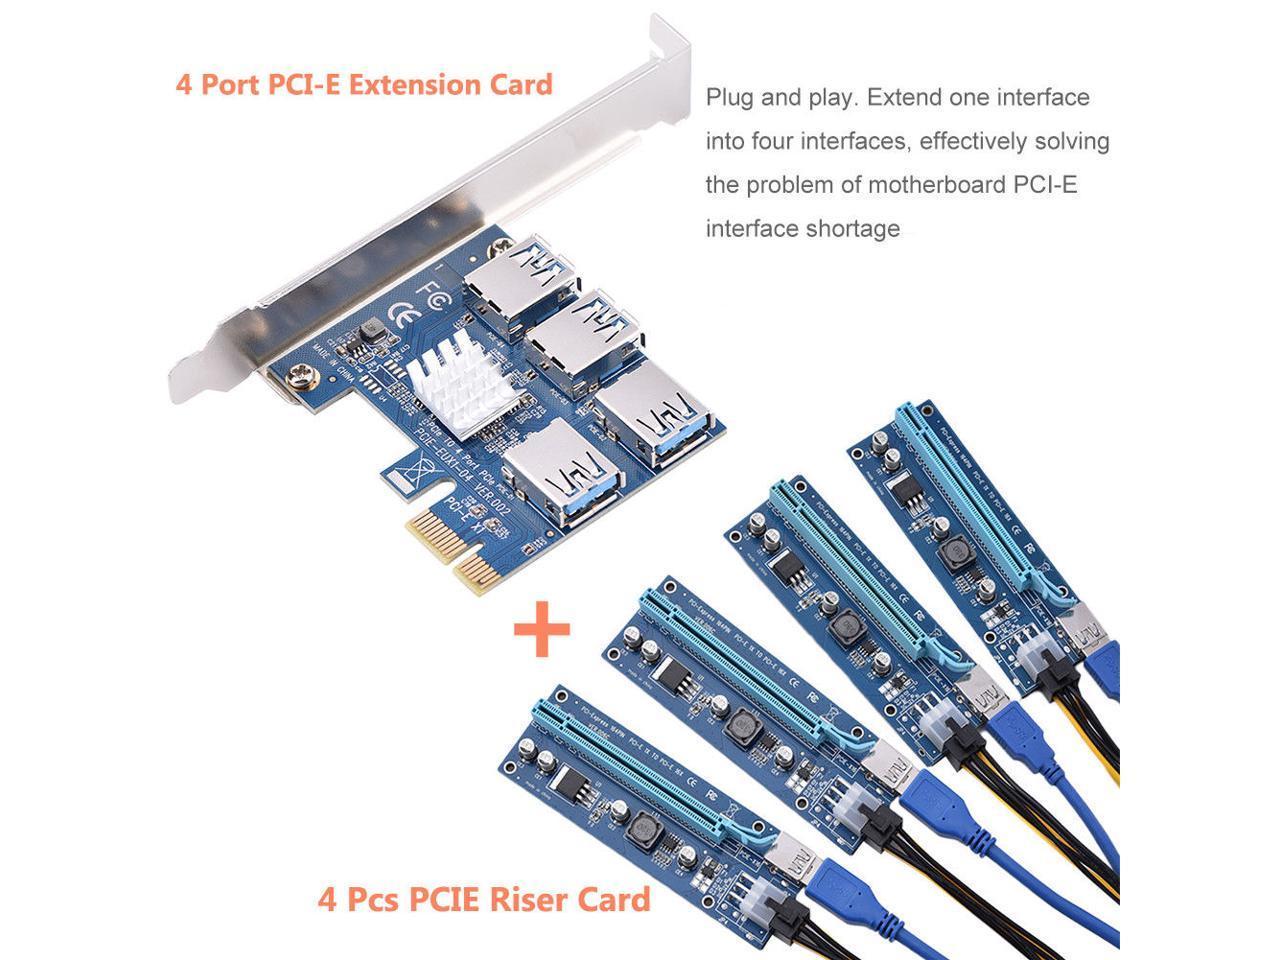 PCI-E Riser Card Pcie USB 3.0 Expansion Card Pcie 1 to 4 Adatper PCI-E USB 3.0 Card Pcie 1x to 16x Splitter Pcie Riser Cards Mother Board Graphics Card with 4pack Pcie Riser Cable for Bitcoin Mining